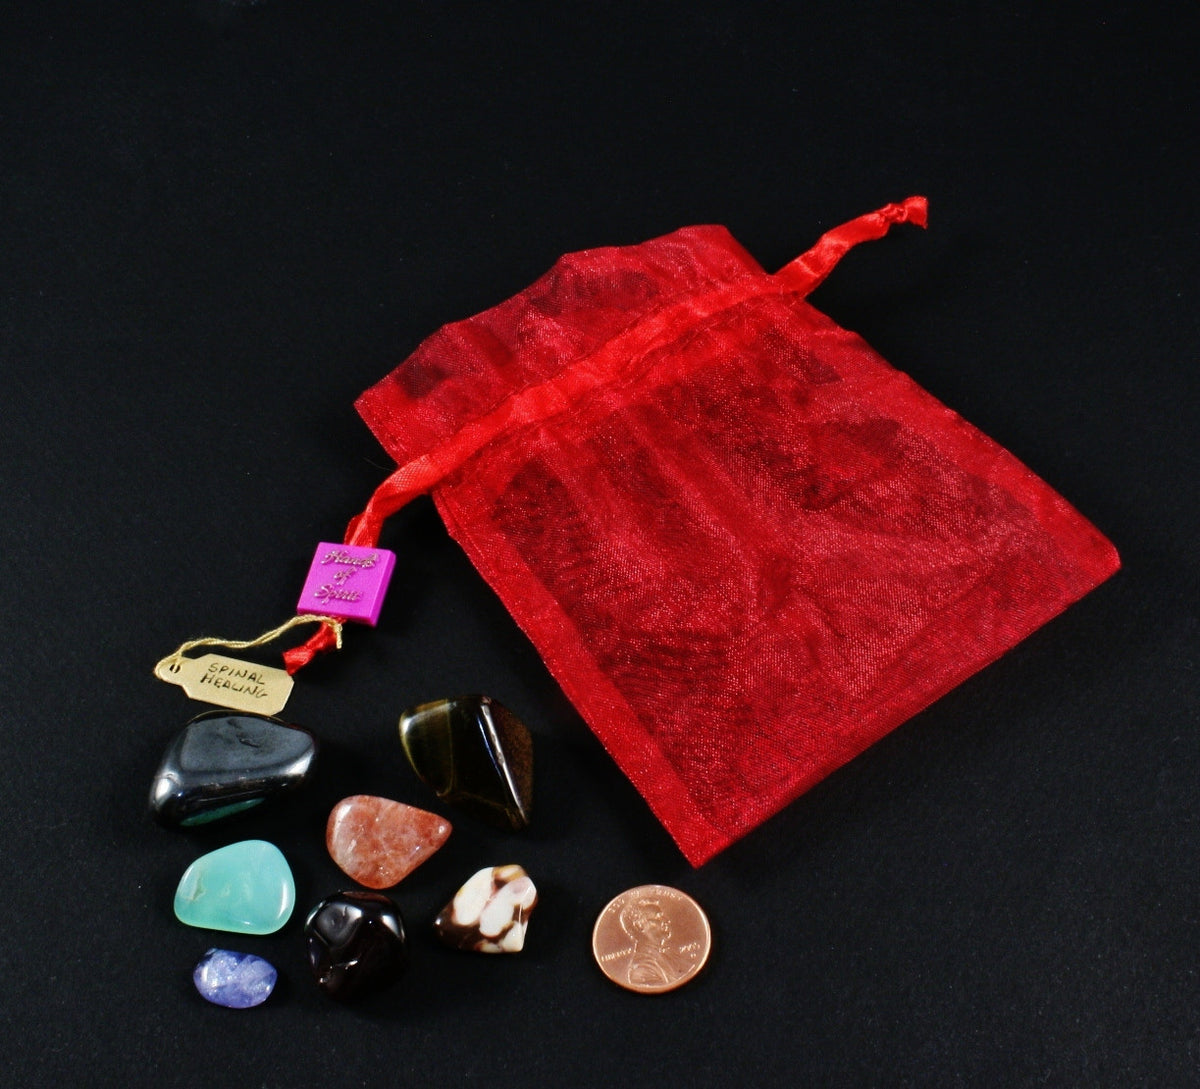 Spinal Healing Pouch with Reference Pamphlet